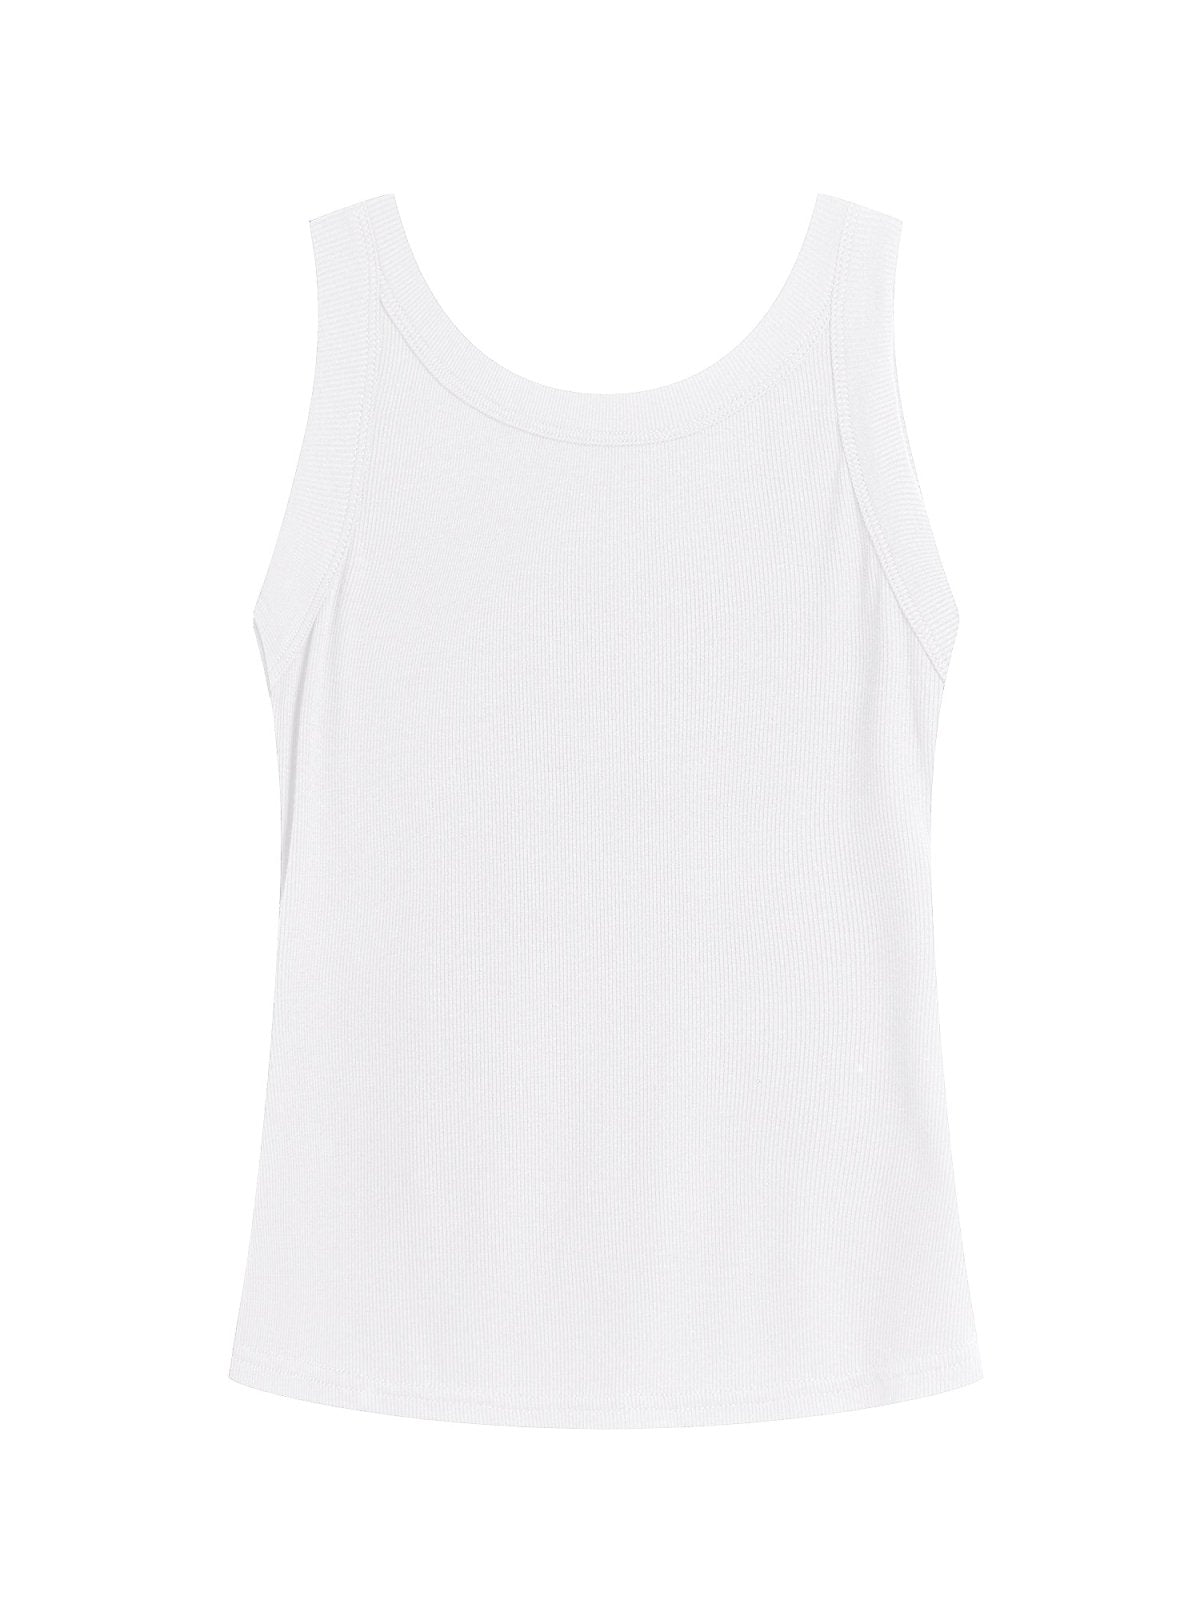 Ribbed Sleeveless Top - DAG-G-9580-22MarshmallowWiteF - Marshmallow White - F - D'ZAGE Designs